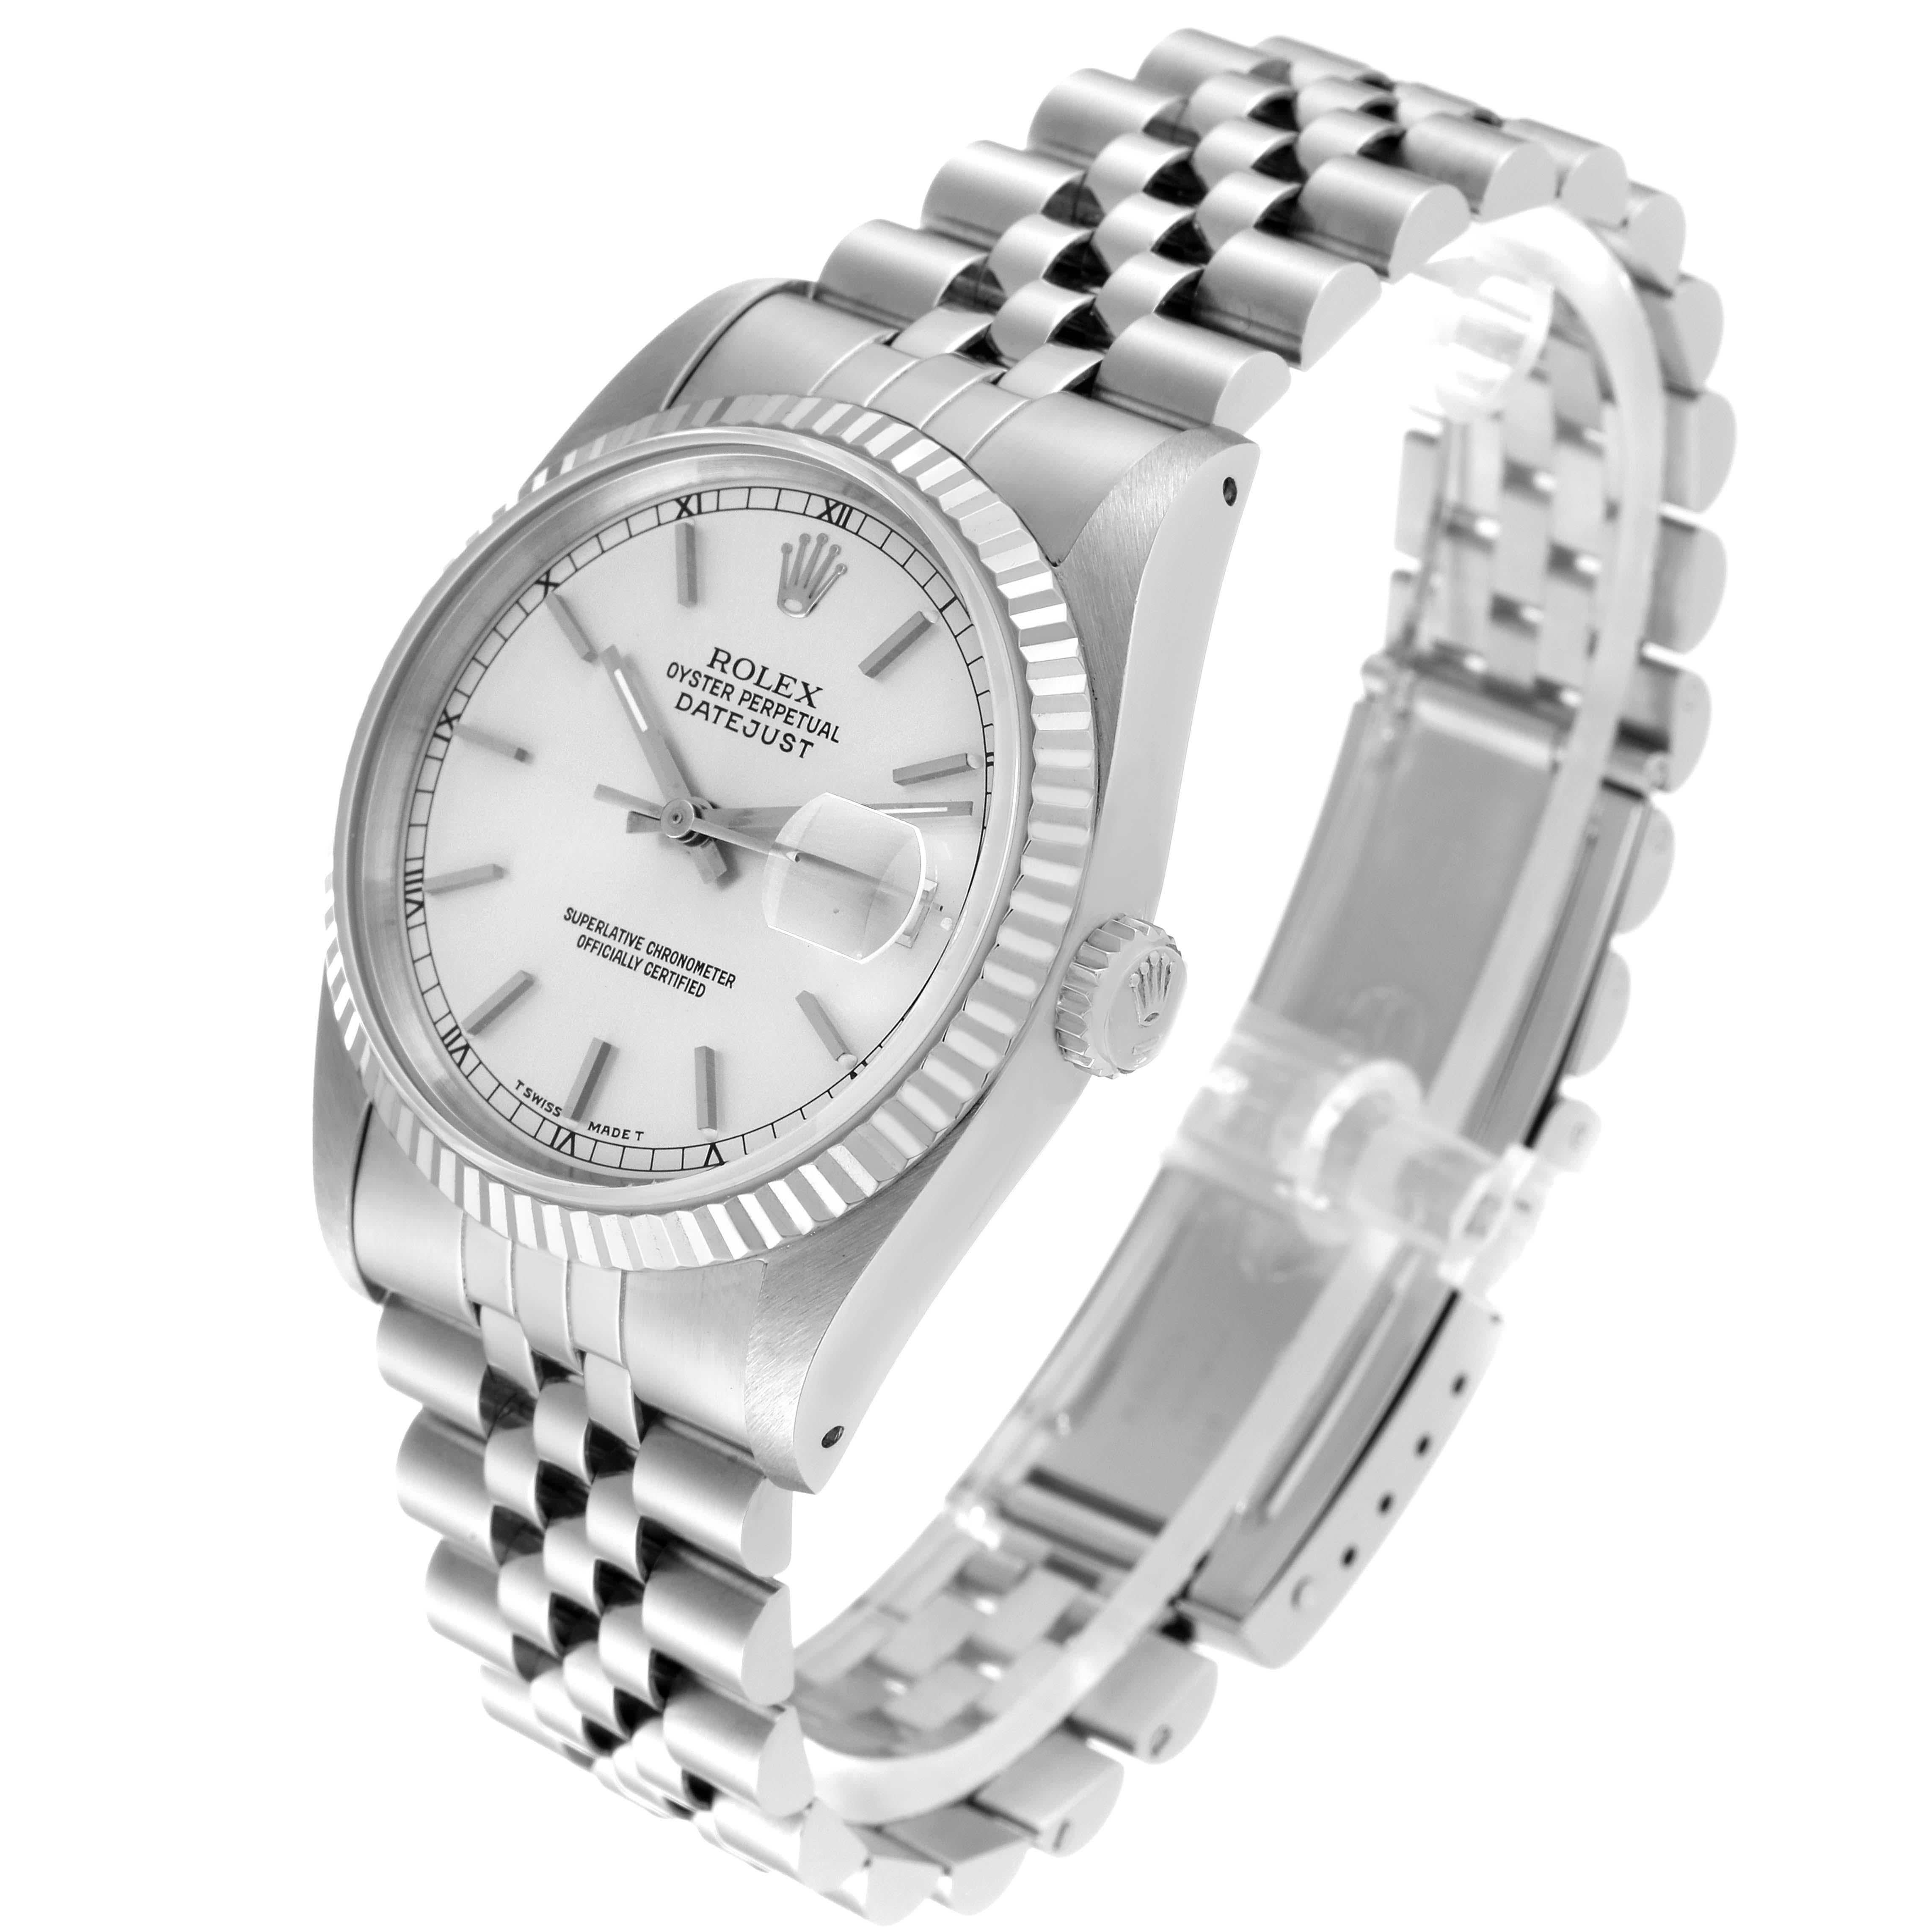 Rolex Datejust Silver Dial Steel White Gold Mens Watch 16234 For Sale 6